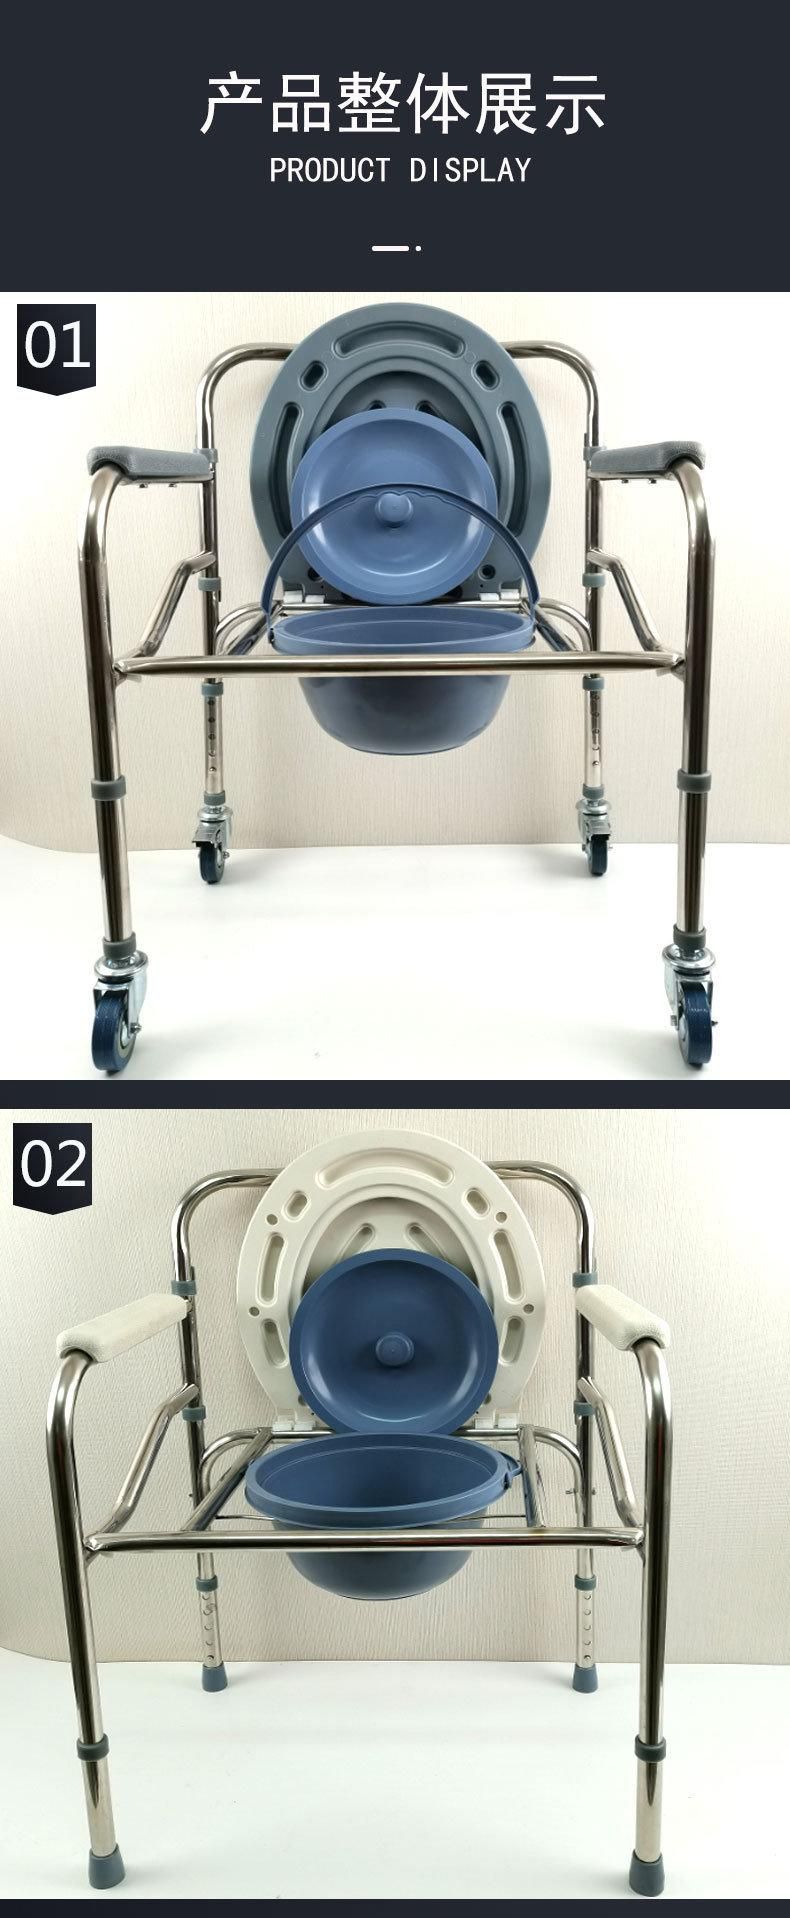 Cheap Price ISO Approved Aluminum Wheelchair for Disabled People Commode Parts Chair Bme 668